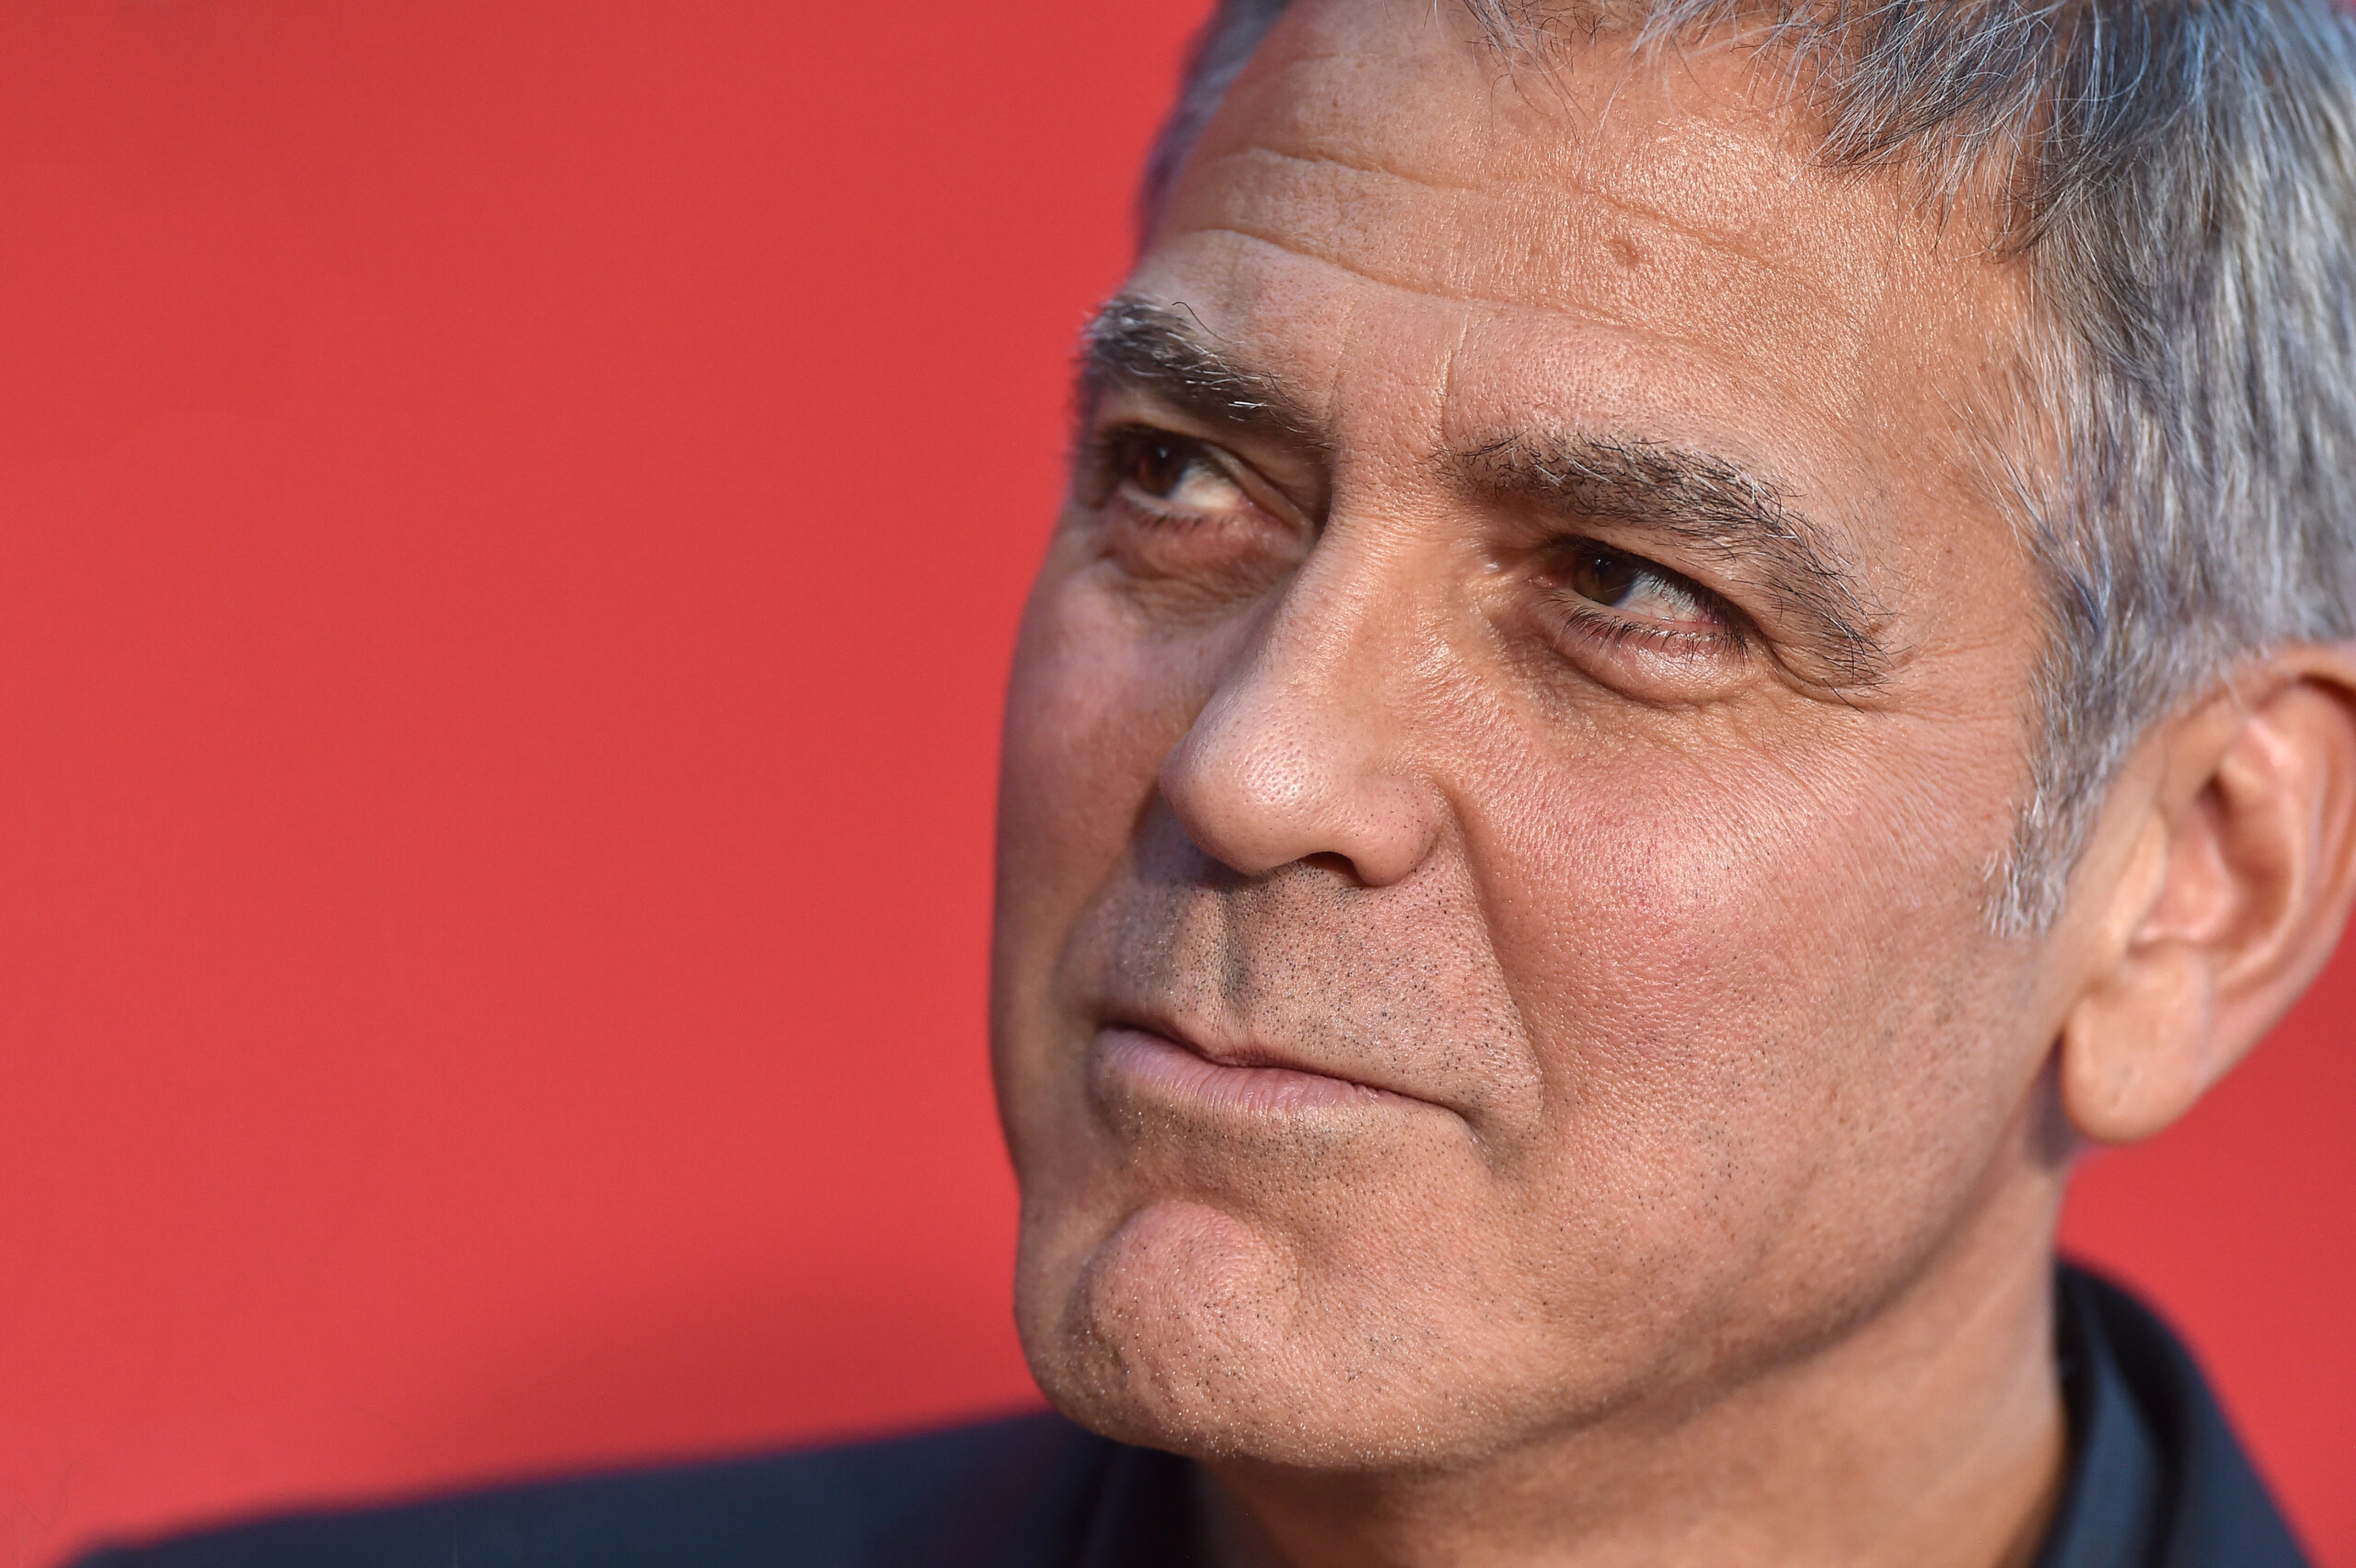 George Clooney casually gave all his best friends briefcases filled with $1 million in cash